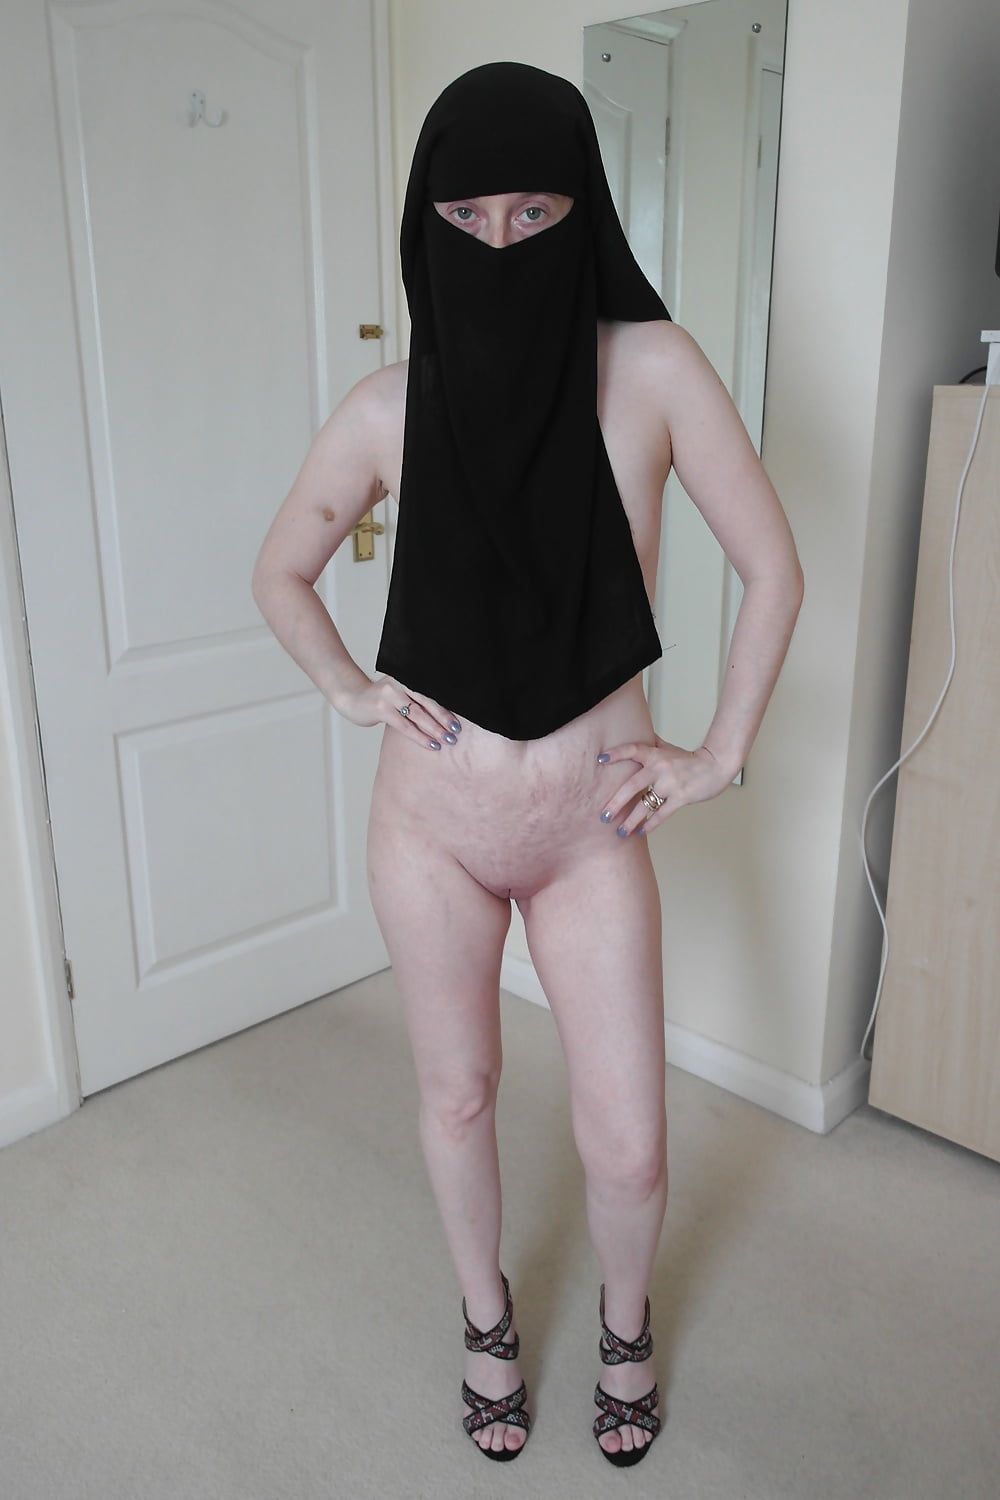 British Black Naked - British wife Naked in Black Niqab Porn Pictures, XXX Photos, Sex Images  #4041030 - PICTOA